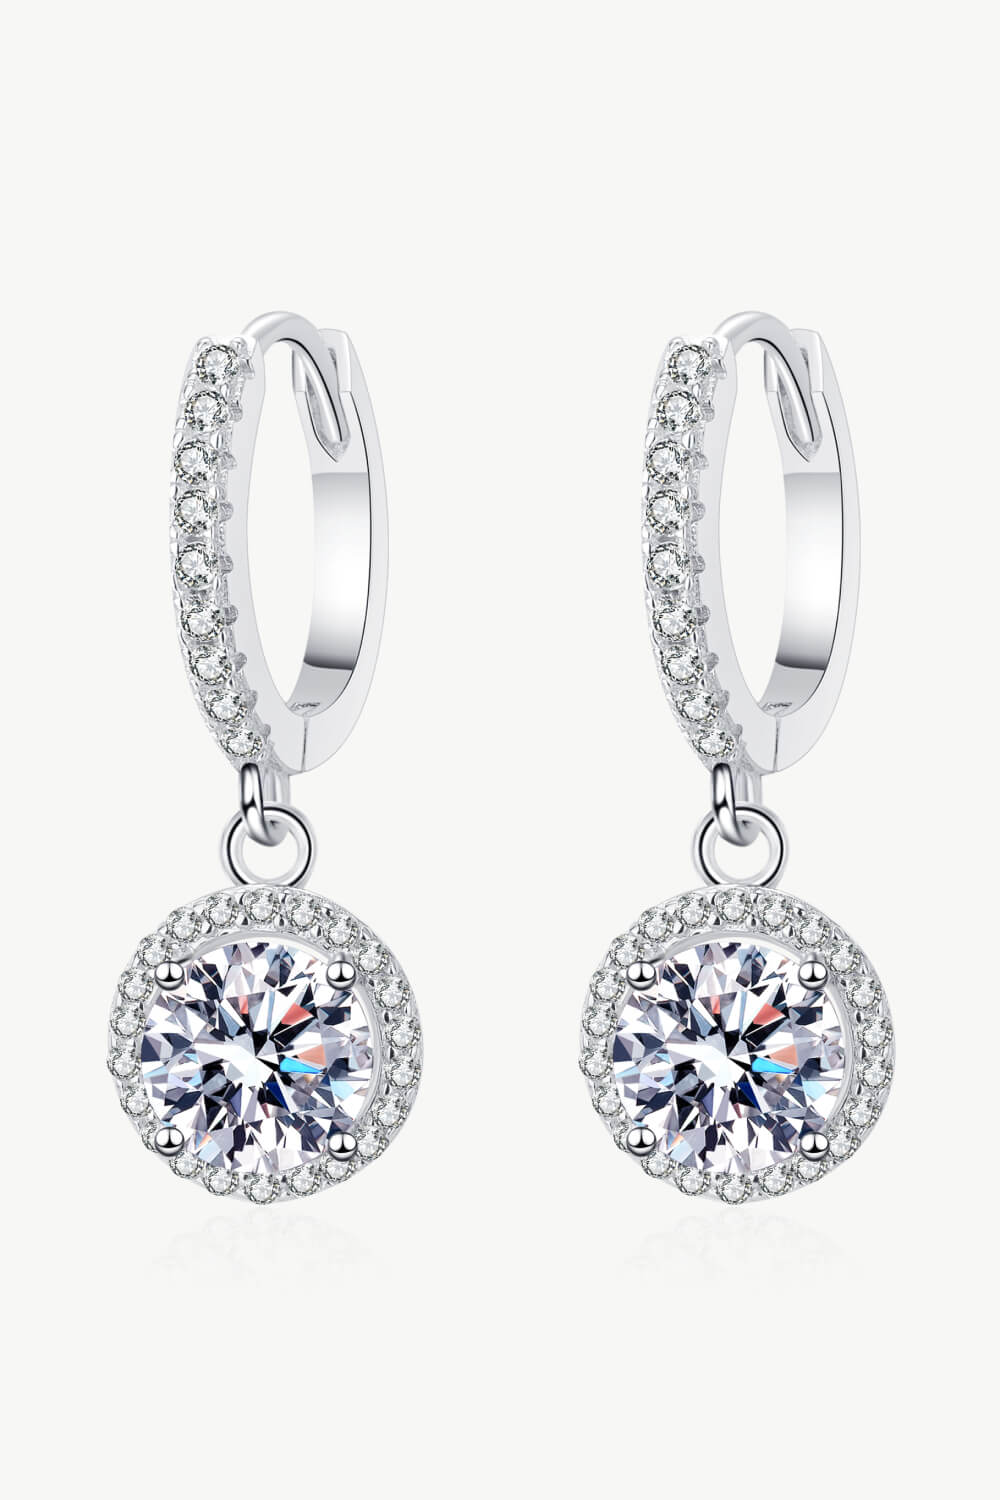 Jessica 2 Carat Moissanite Round-Shaped Drop Earrings